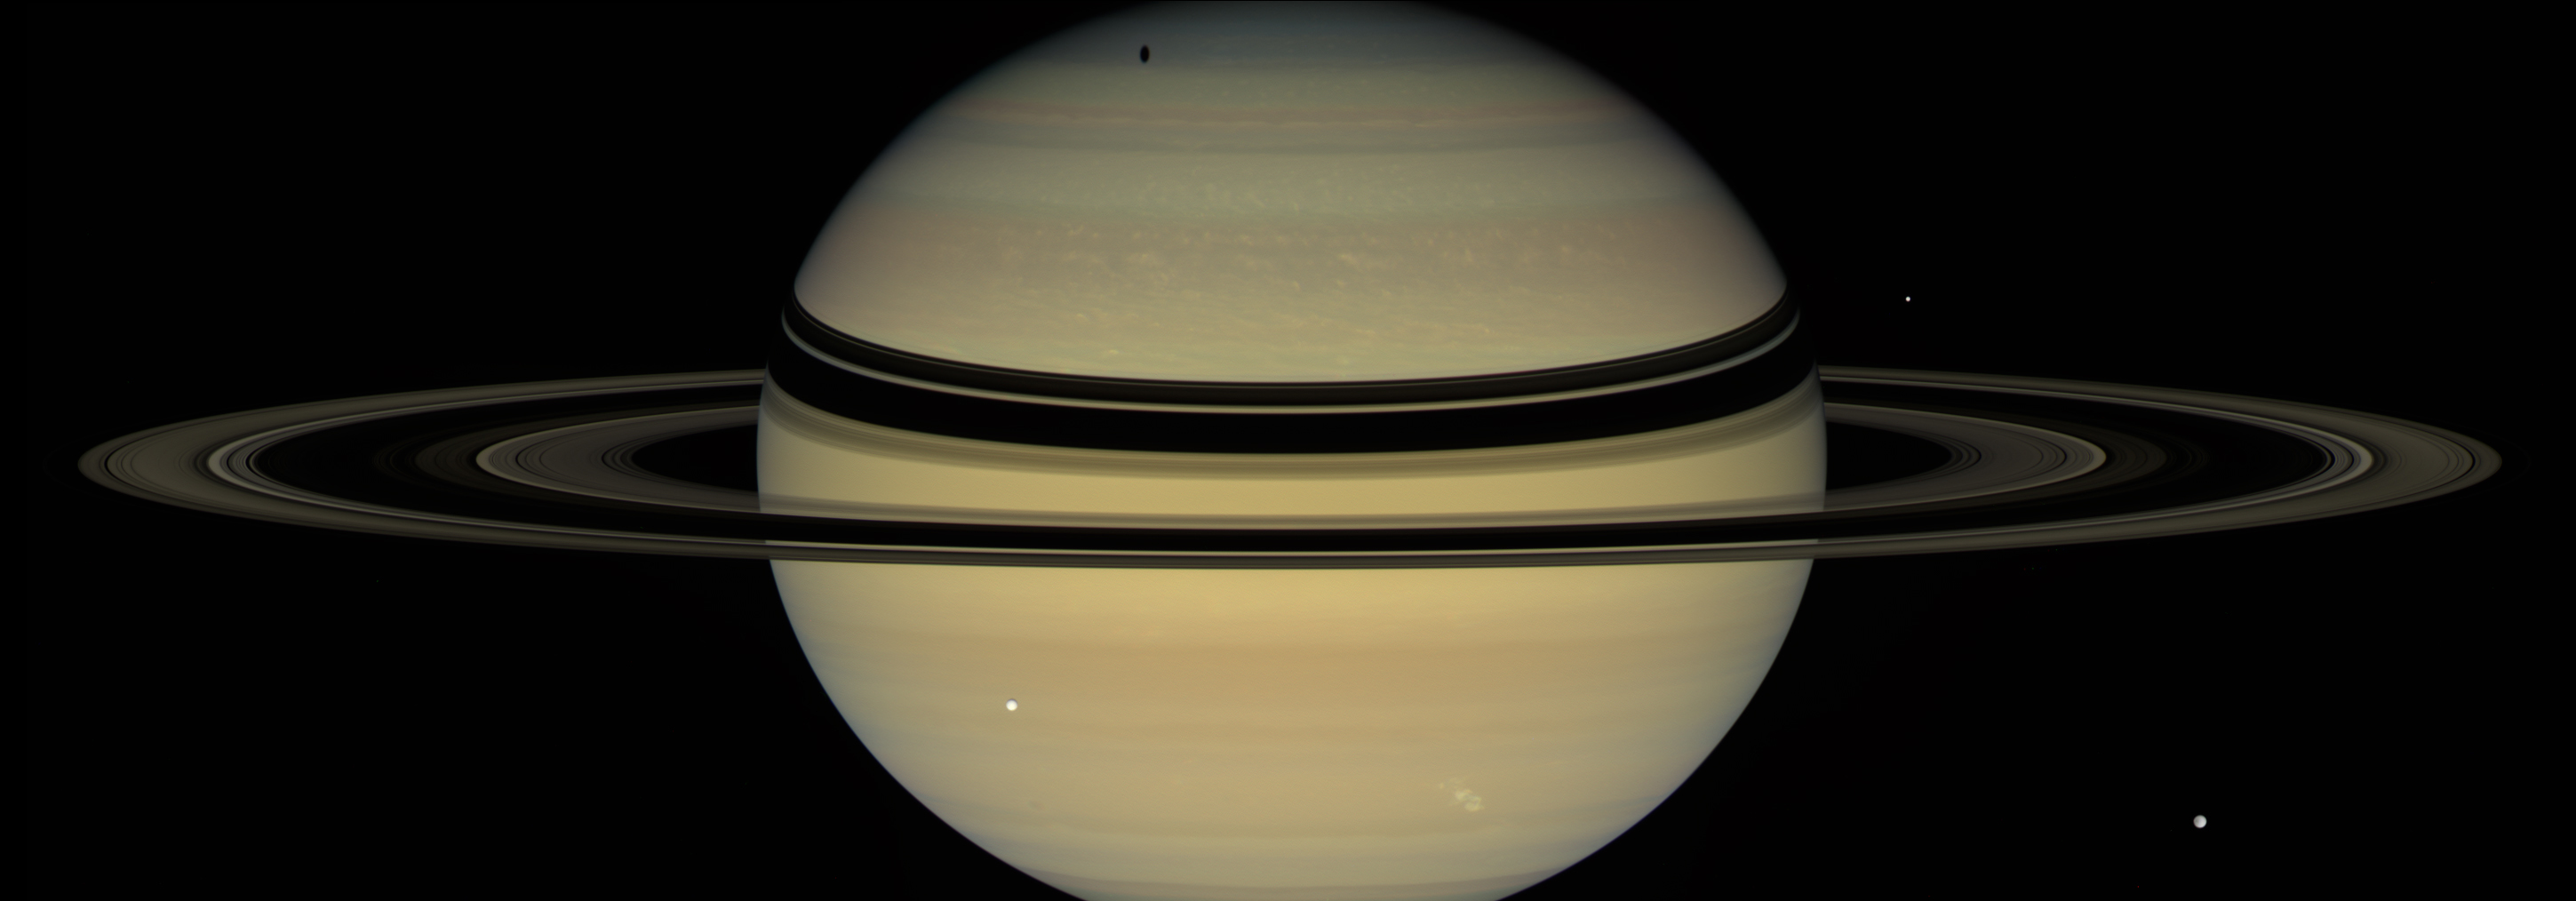 wide view of saturn and its rings with relatively smaller moons visible